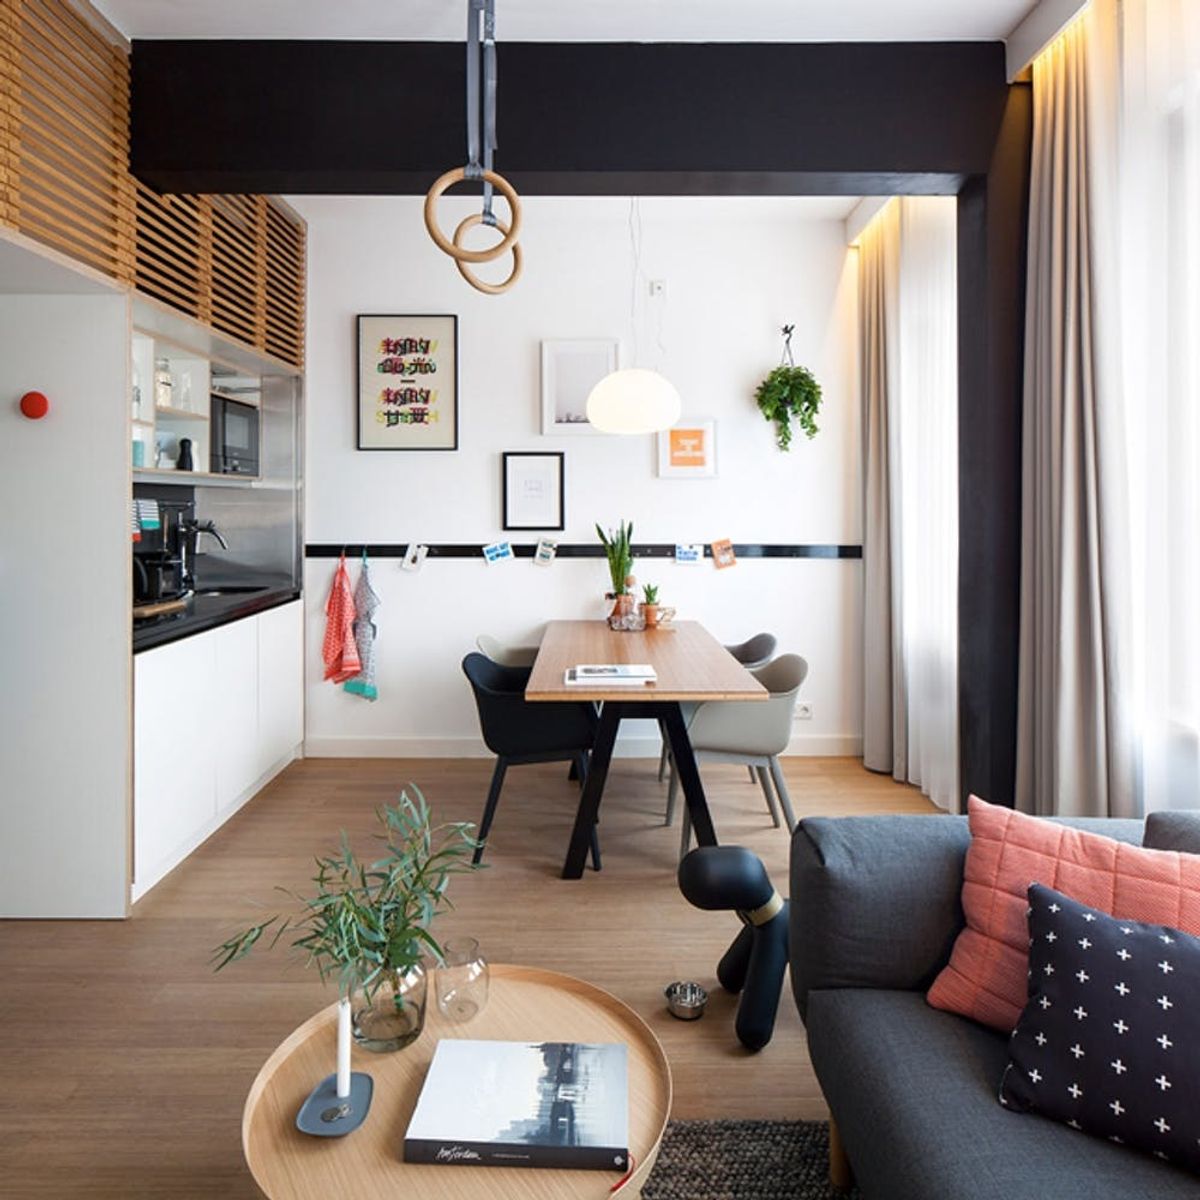 This Tiny Loft Is the Smartest Small Space You’ve Ever Seen